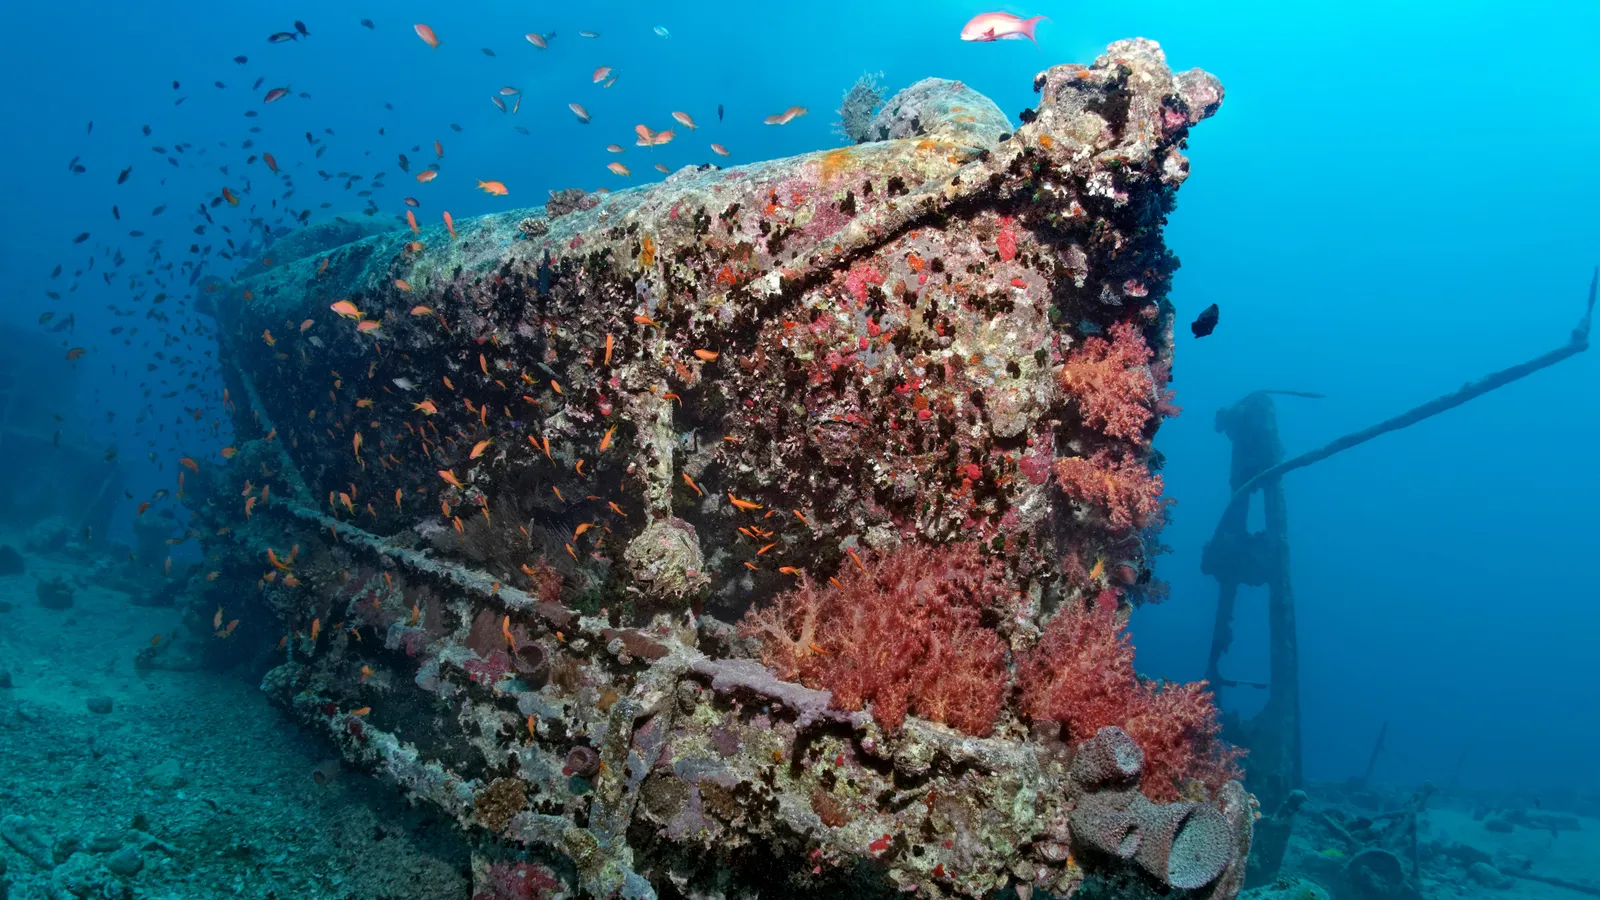 How many shipwrecks are there in the world's oceans? 